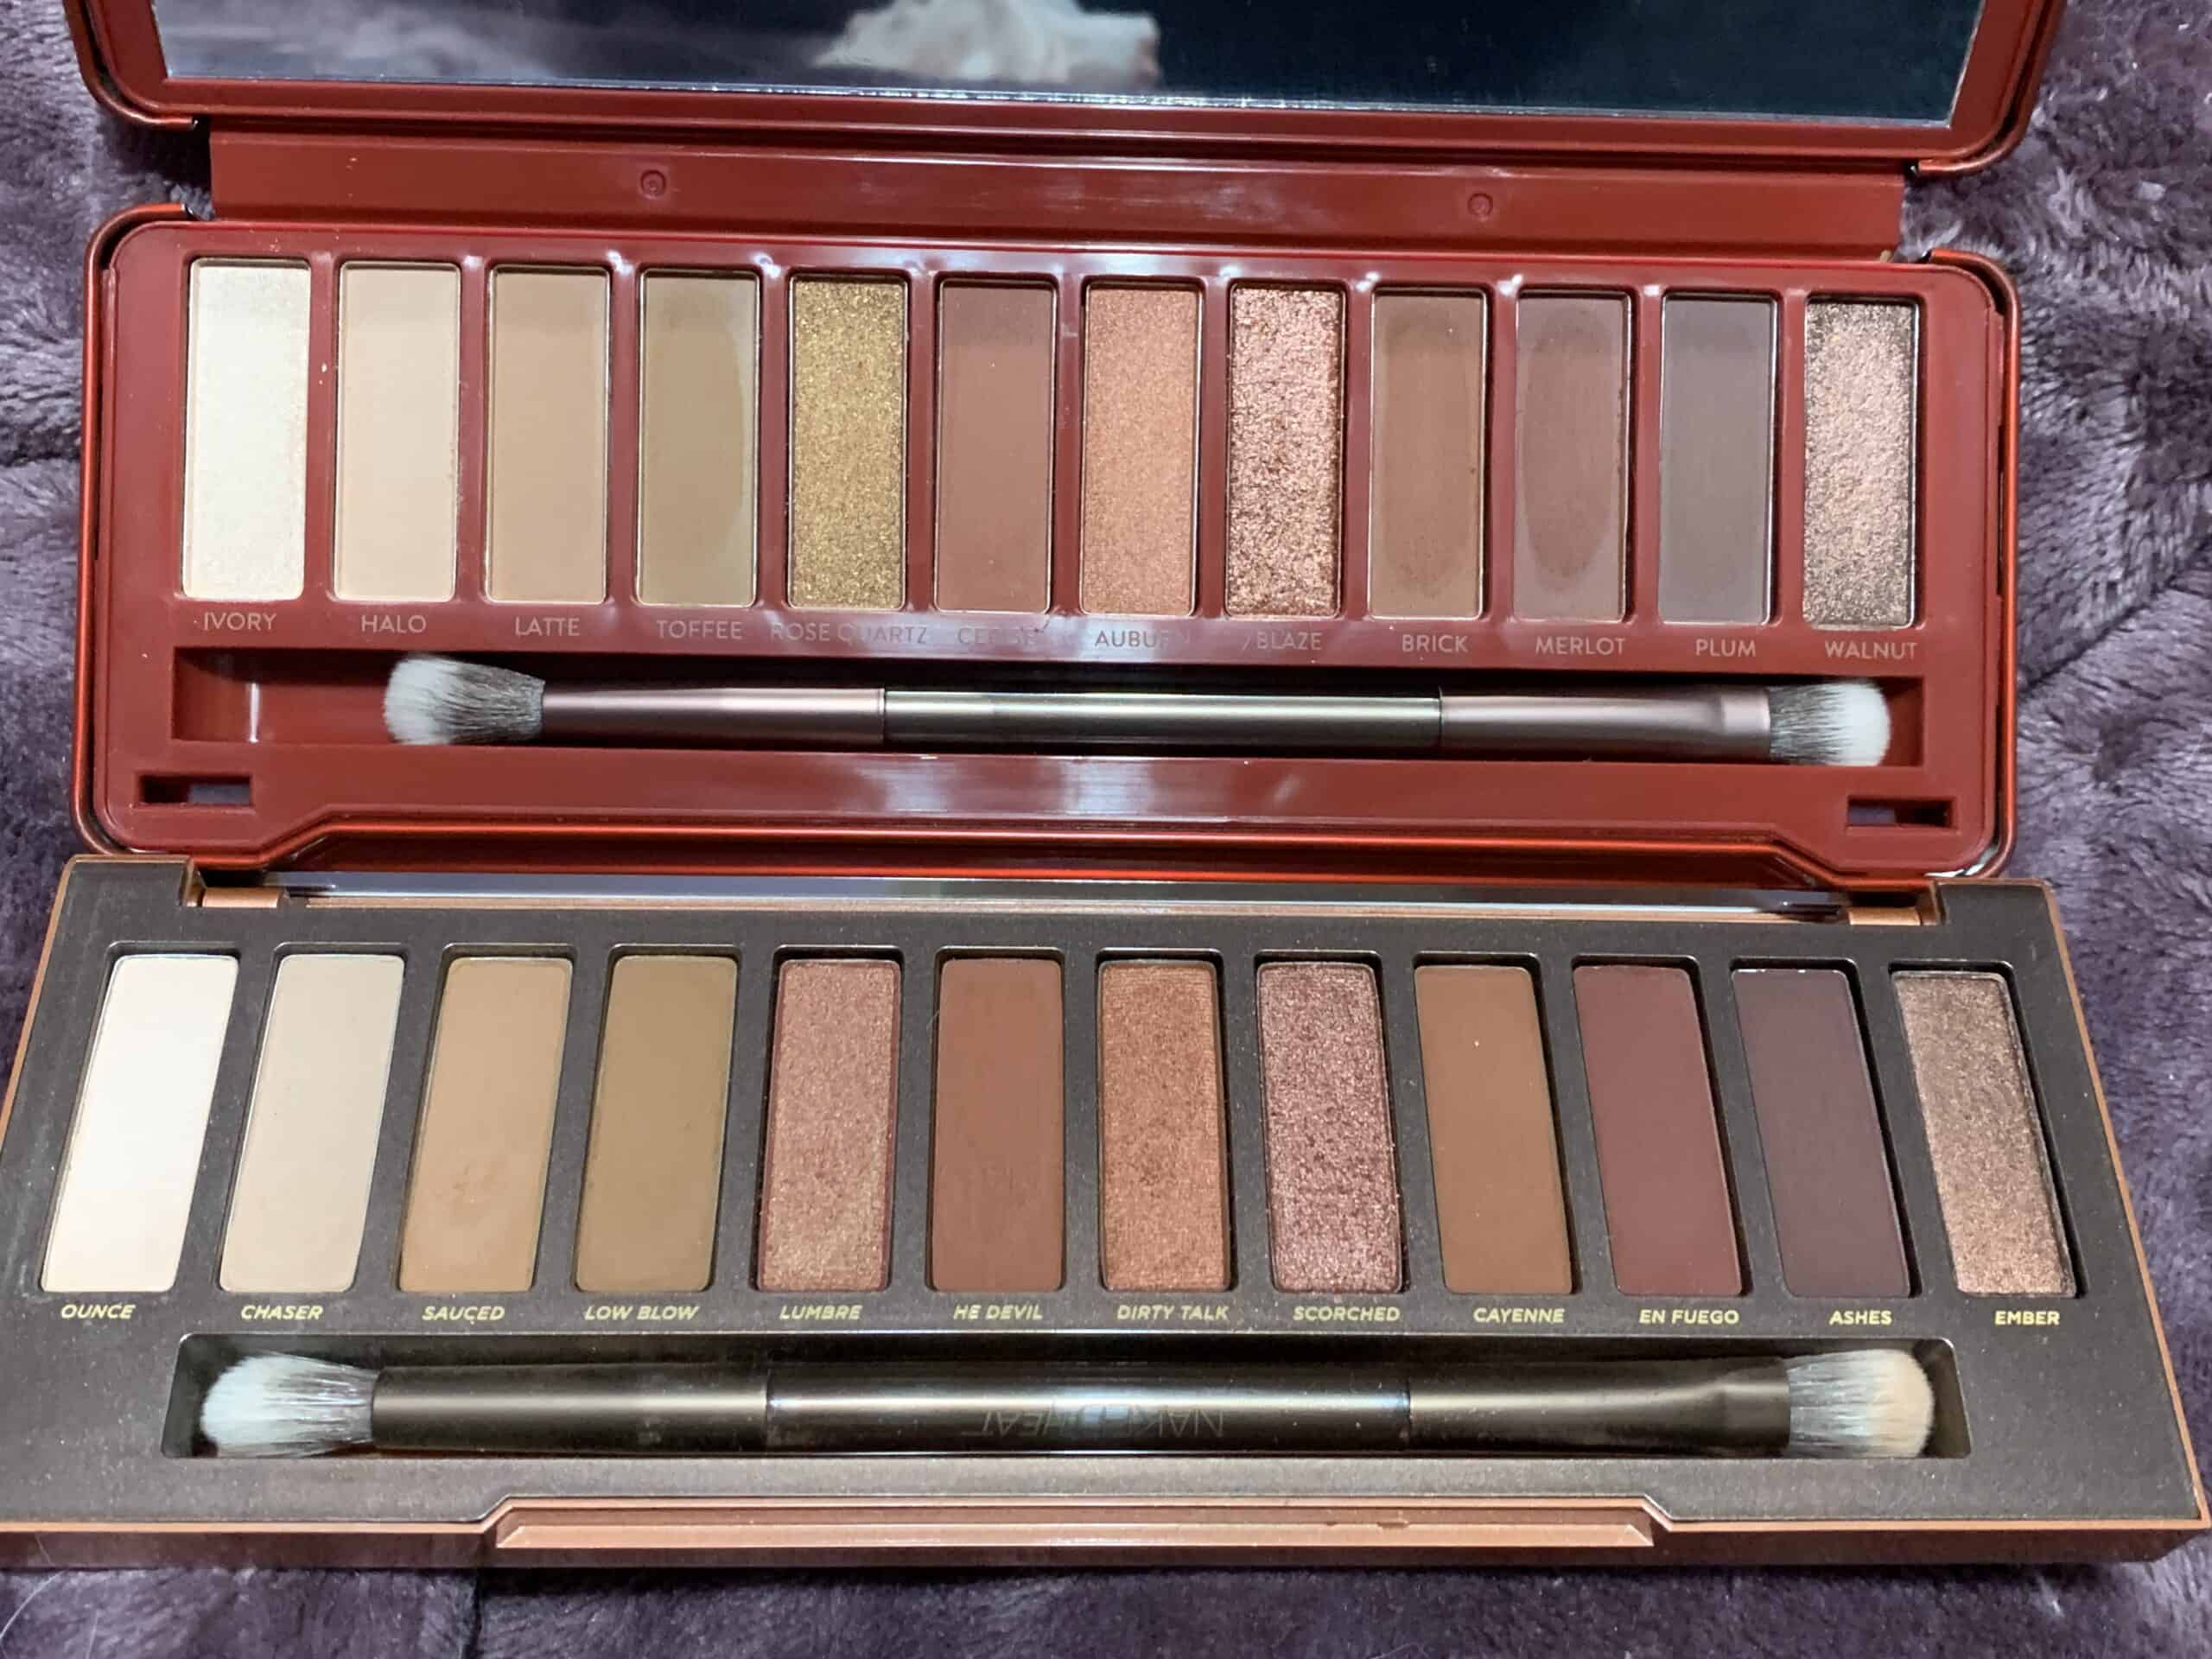 lacura urban decay dupe pans side by side